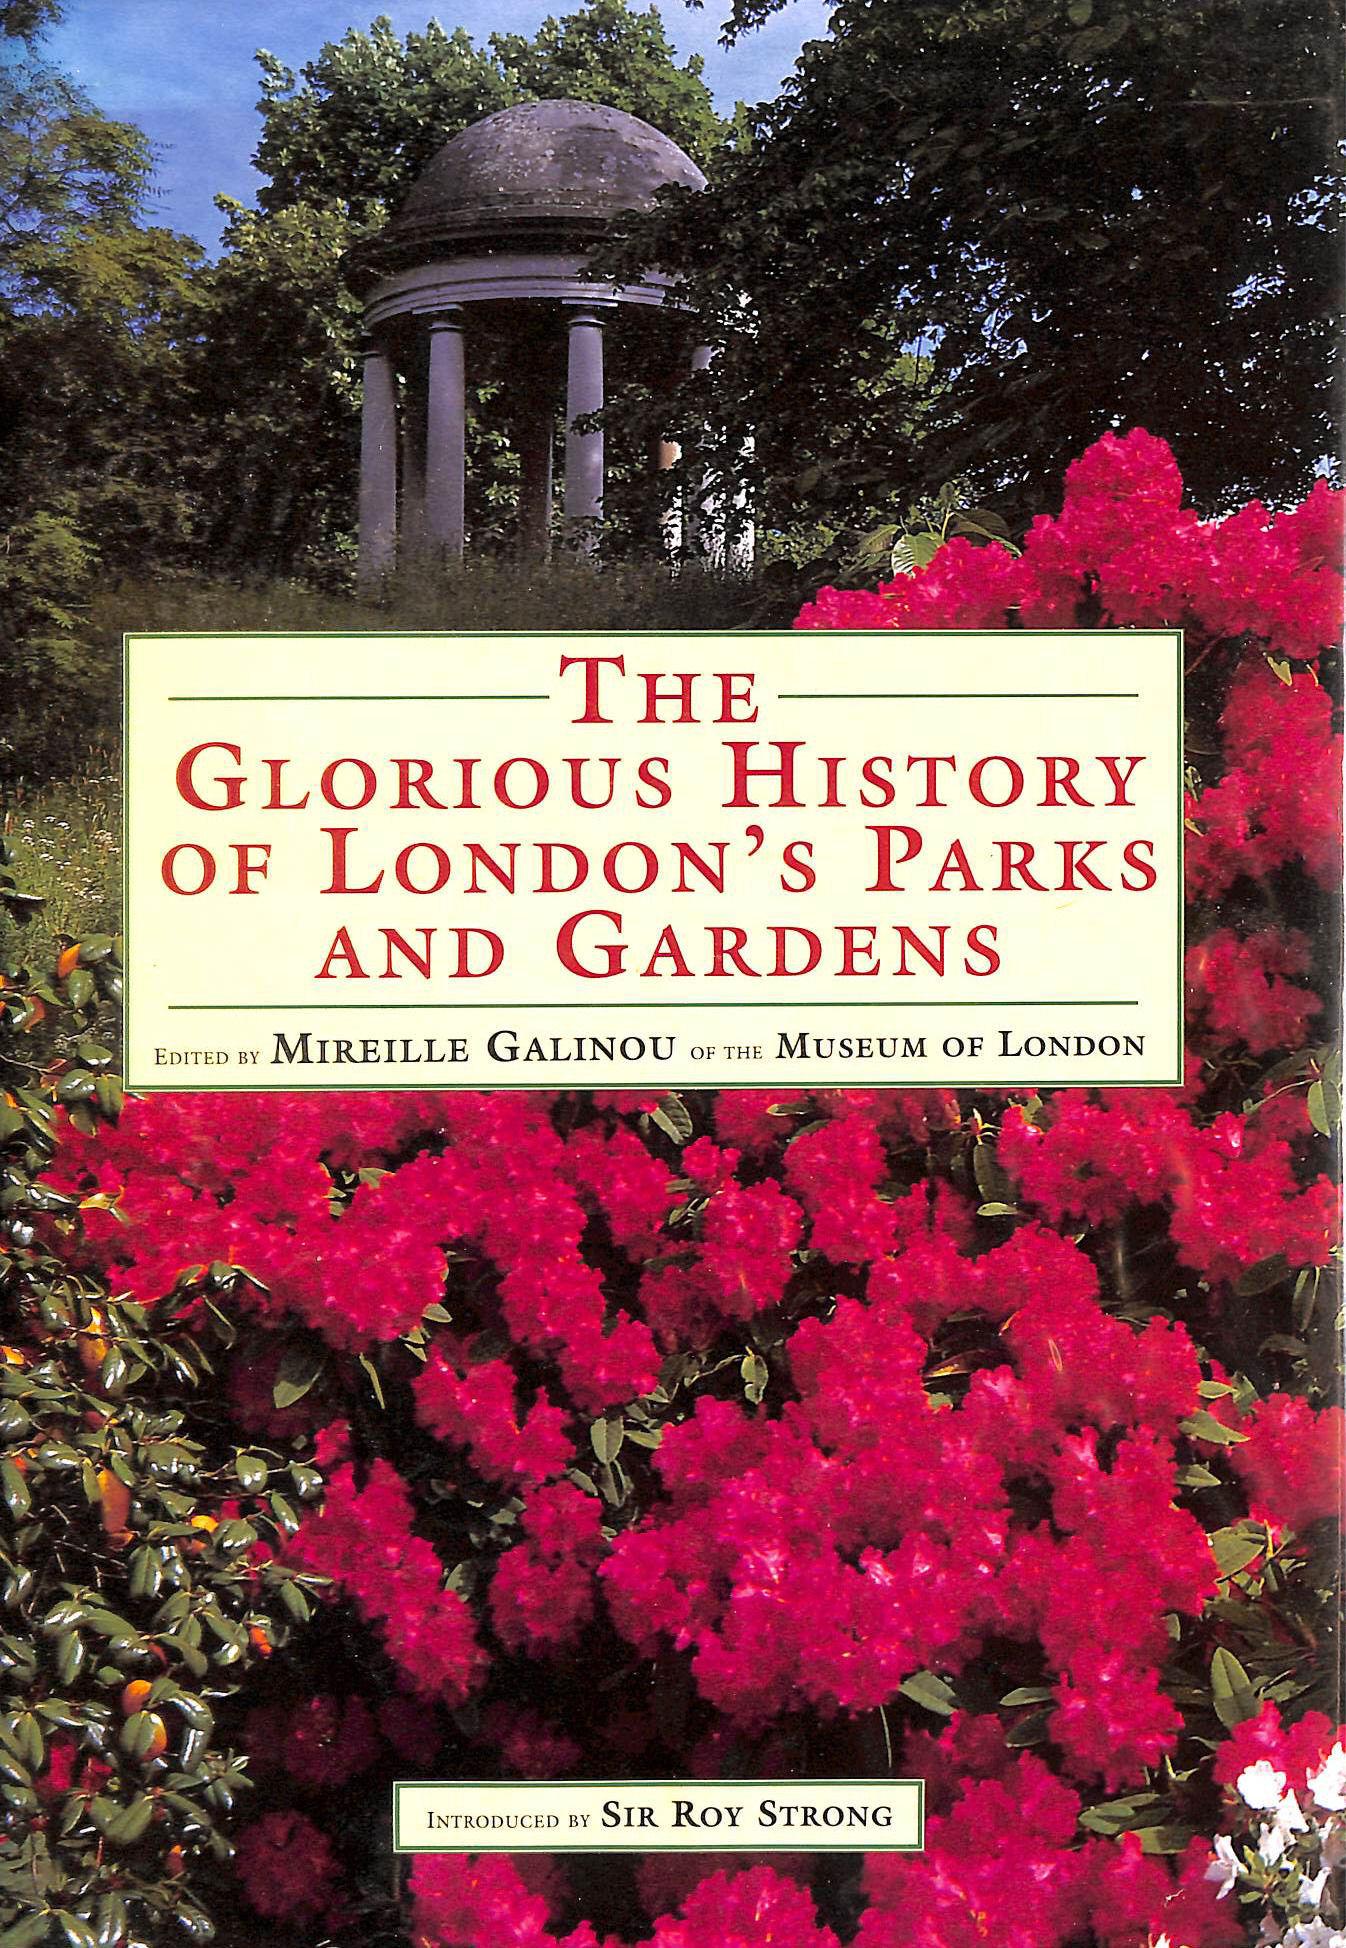 GALINOU, MIREILLE [EDITOR]; STRONG, SIR ROY [INTRODUCTION]; - Glorious Hist Londons Parks/Ga: Glorious History Of The Capital'S Gardens